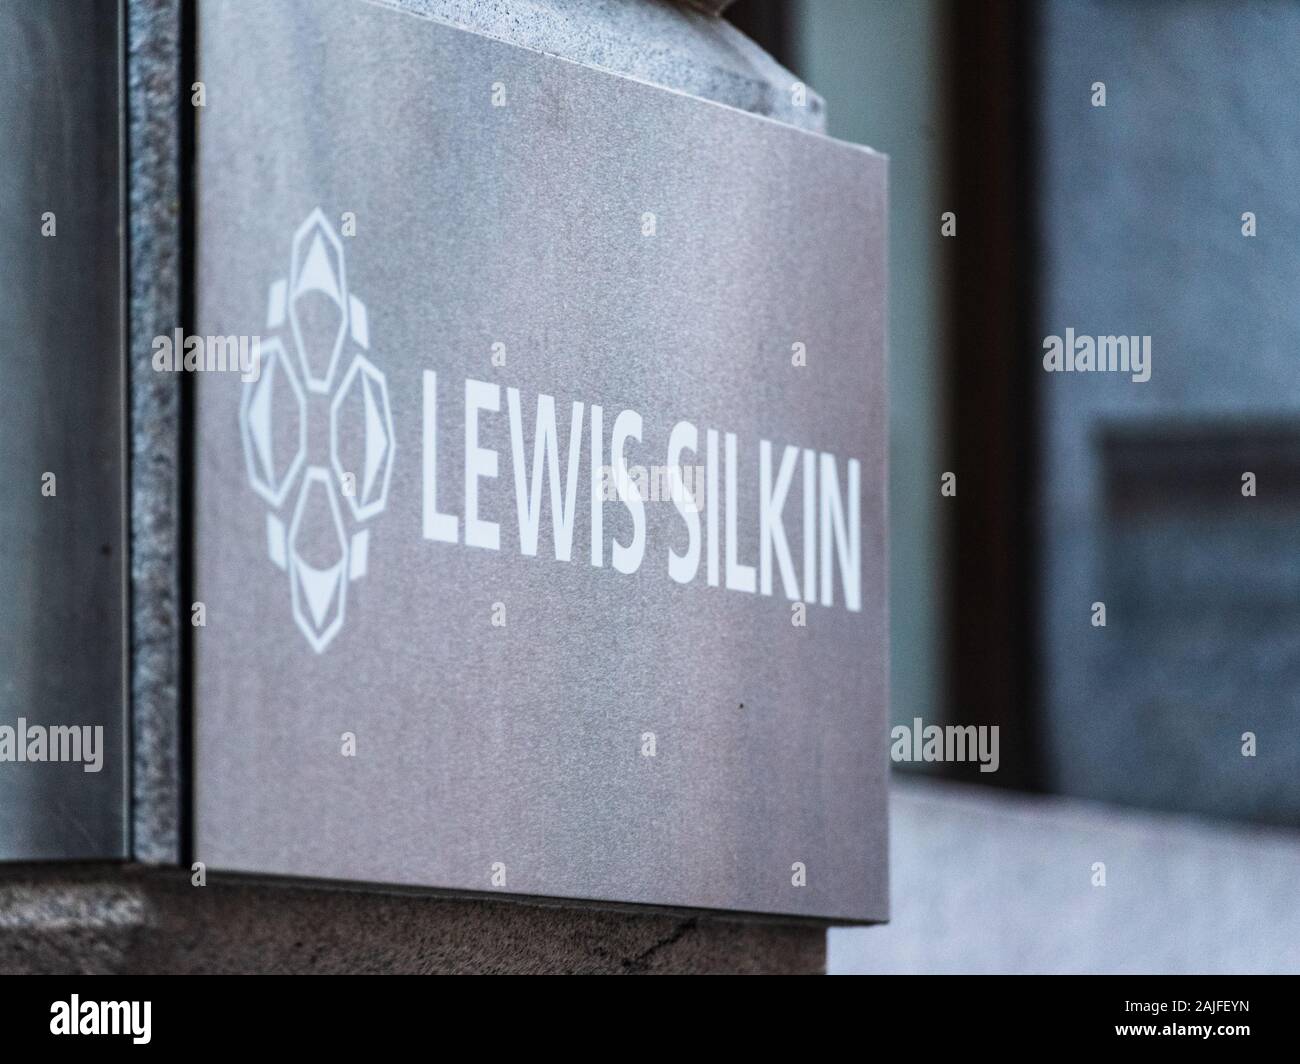 Lewis Silkin London Law Firm. Lewis Silkin LLP 5 Chancery Lane London.  Founded 1950 Stock Photo - Alamy